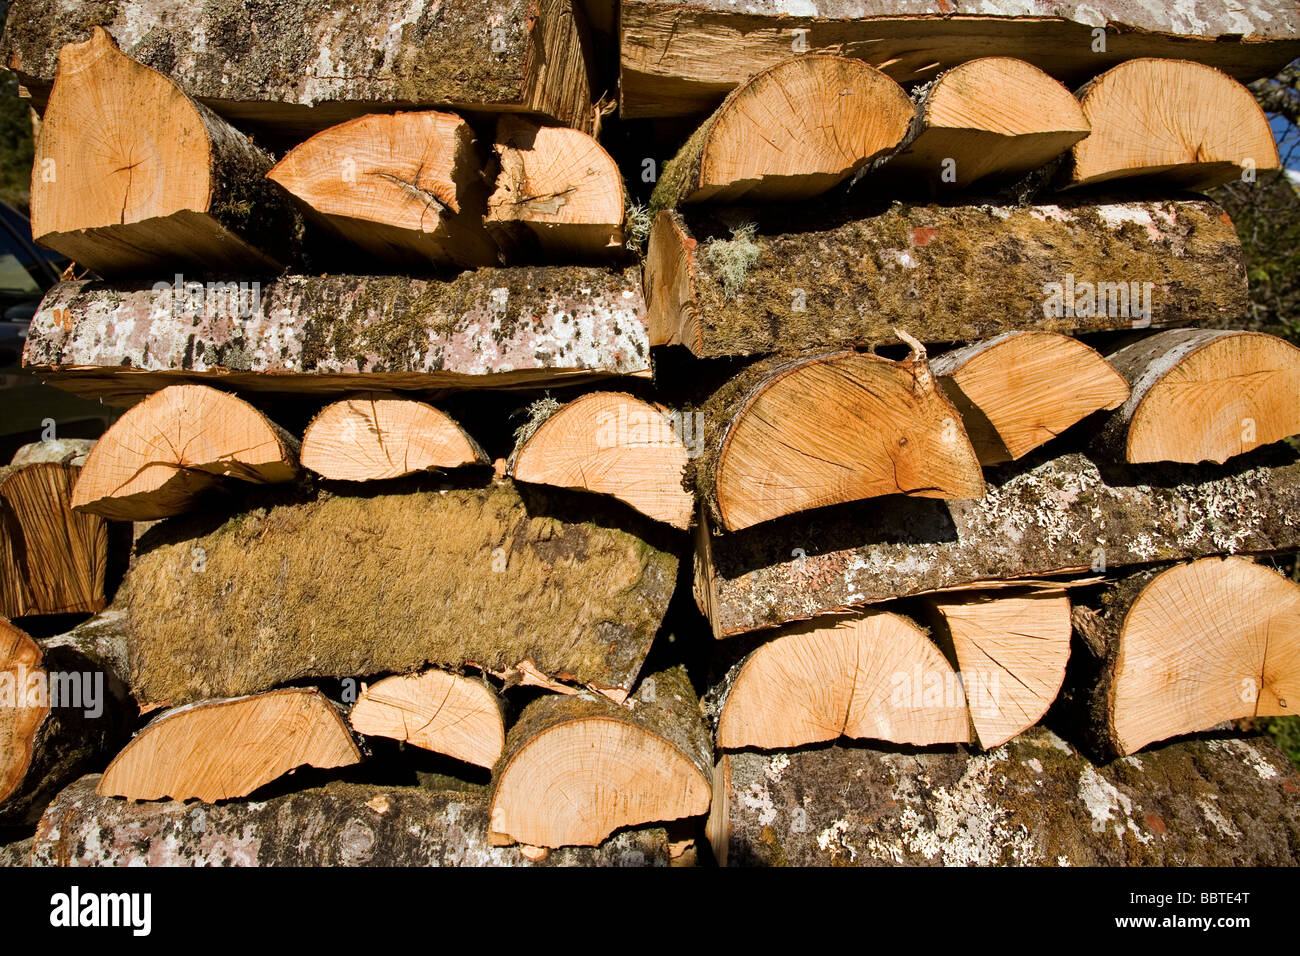 Firewood in a Rural House in the Village of Mogrovejo Shire of Liebana Picos de Europa Cantabria Spain Stock Photo